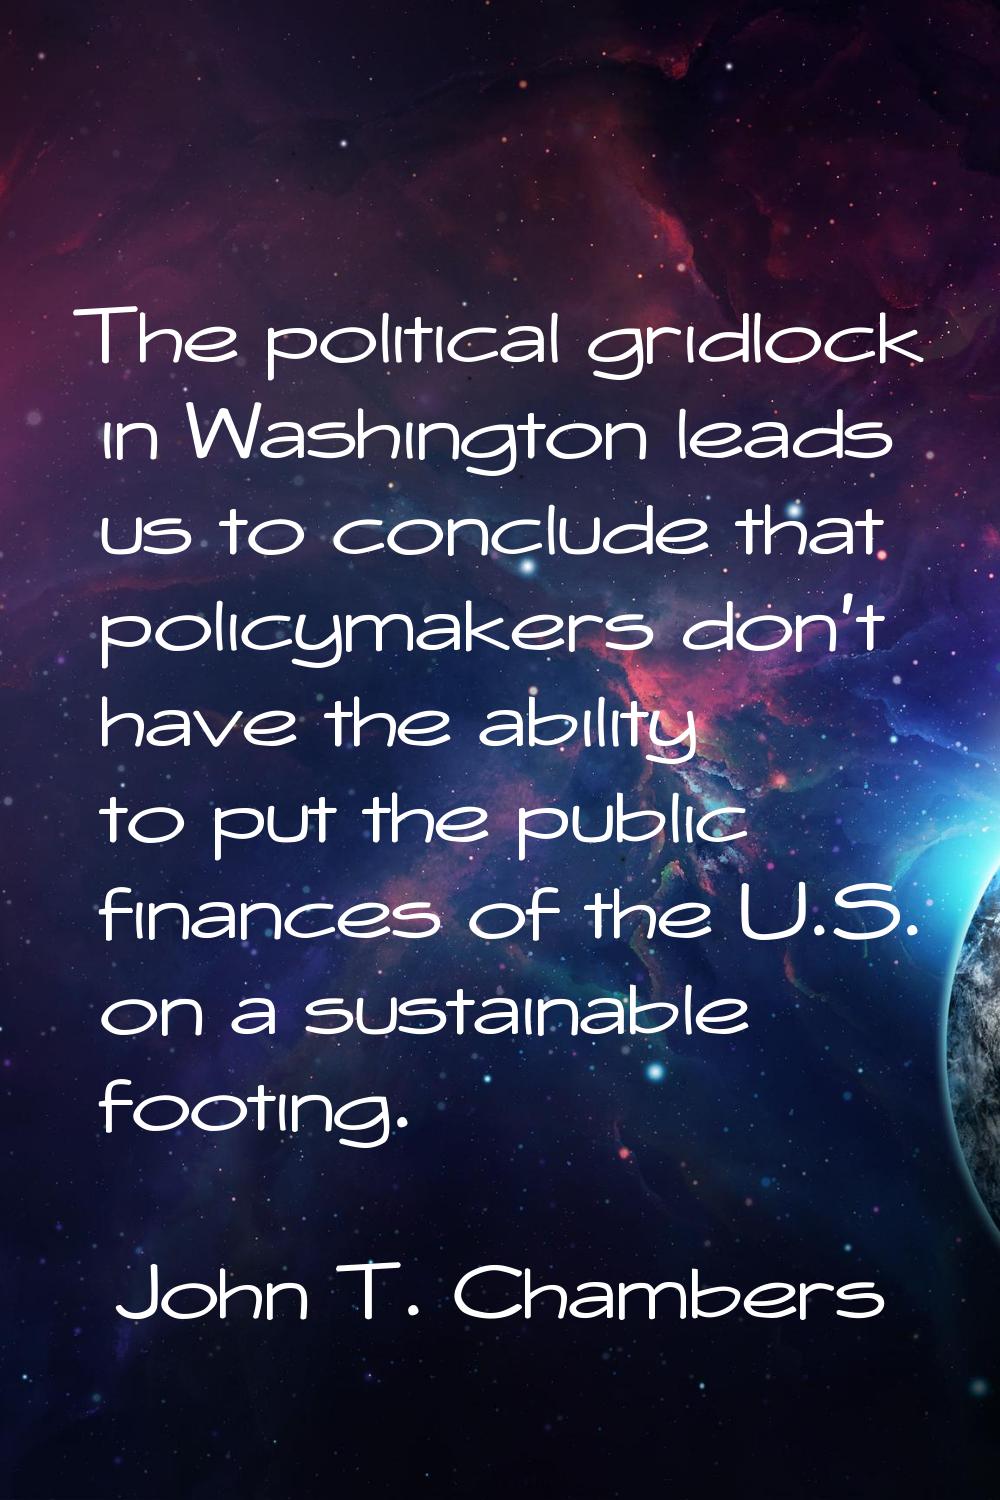 The political gridlock in Washington leads us to conclude that policymakers don't have the ability 